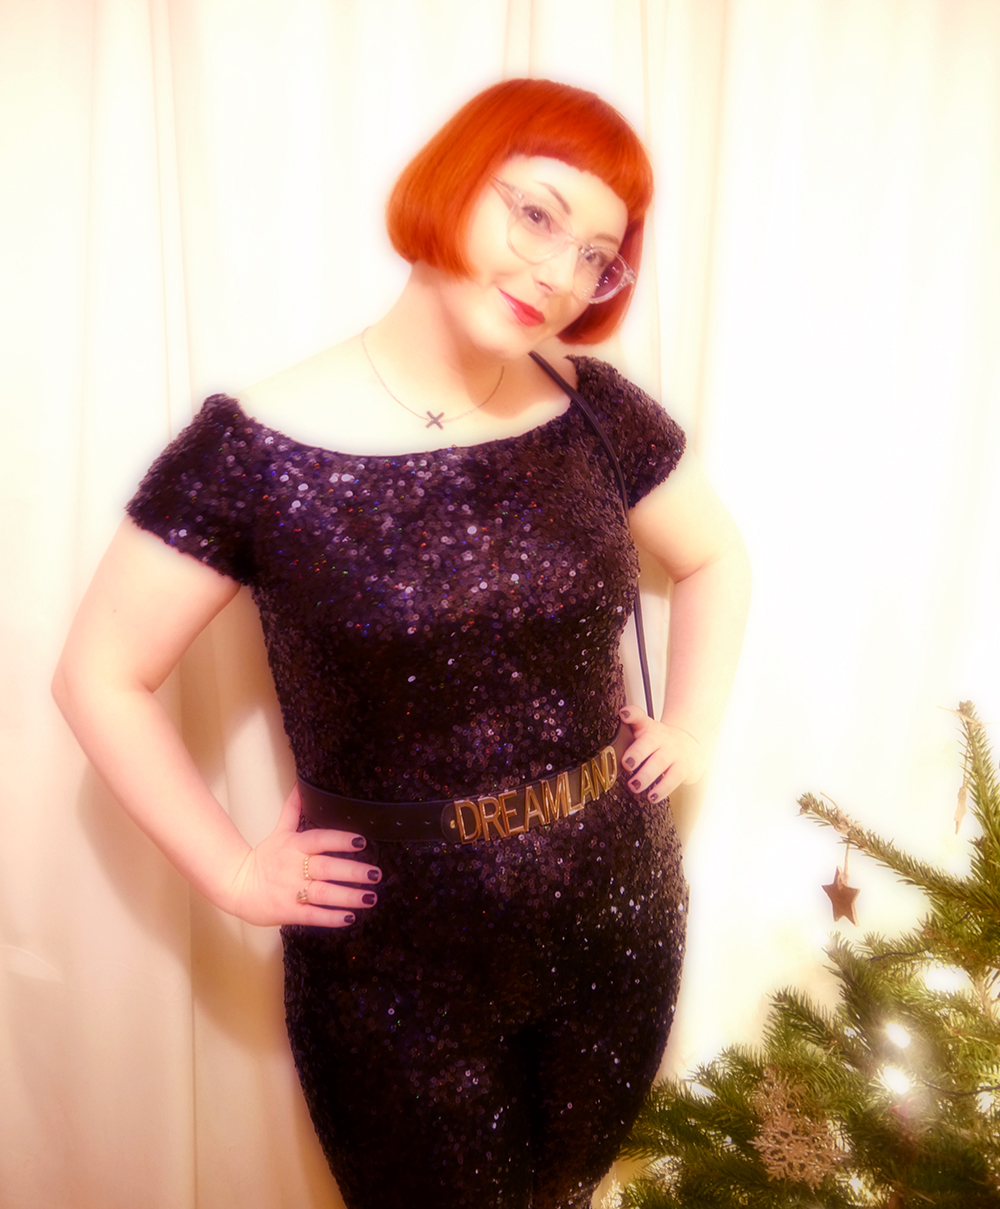 What Helen Wore, Styled by Helen, New Year's eve outfit, hogmanay style, NYE style, 2016, sequin jumpsuit, French Connection, TK Maxx, Dreamland belt, party outfit, party style, sequin style, Little black dress alternative, festive party style, tatty devine kiss necklace, new look platform shoes, 70s sequin style, red head, scottish blogger, blogging duo, ginger bob, Iolla glasses, #seewithiolla, clear glasses